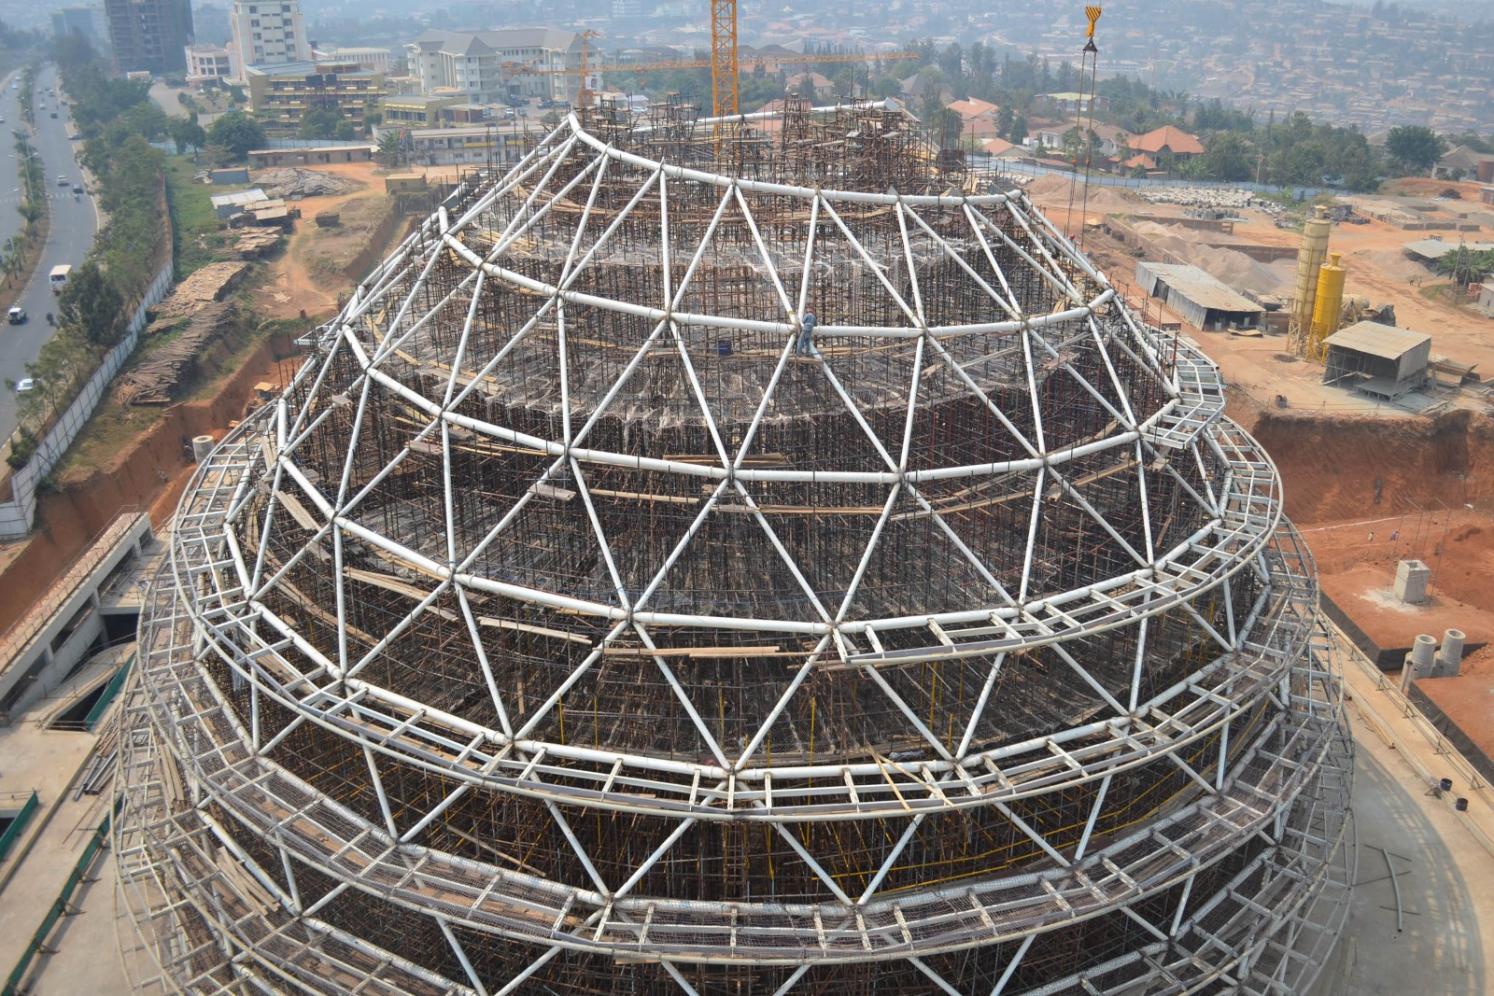 Construction of Dome - aerial view (livingspaces.net)